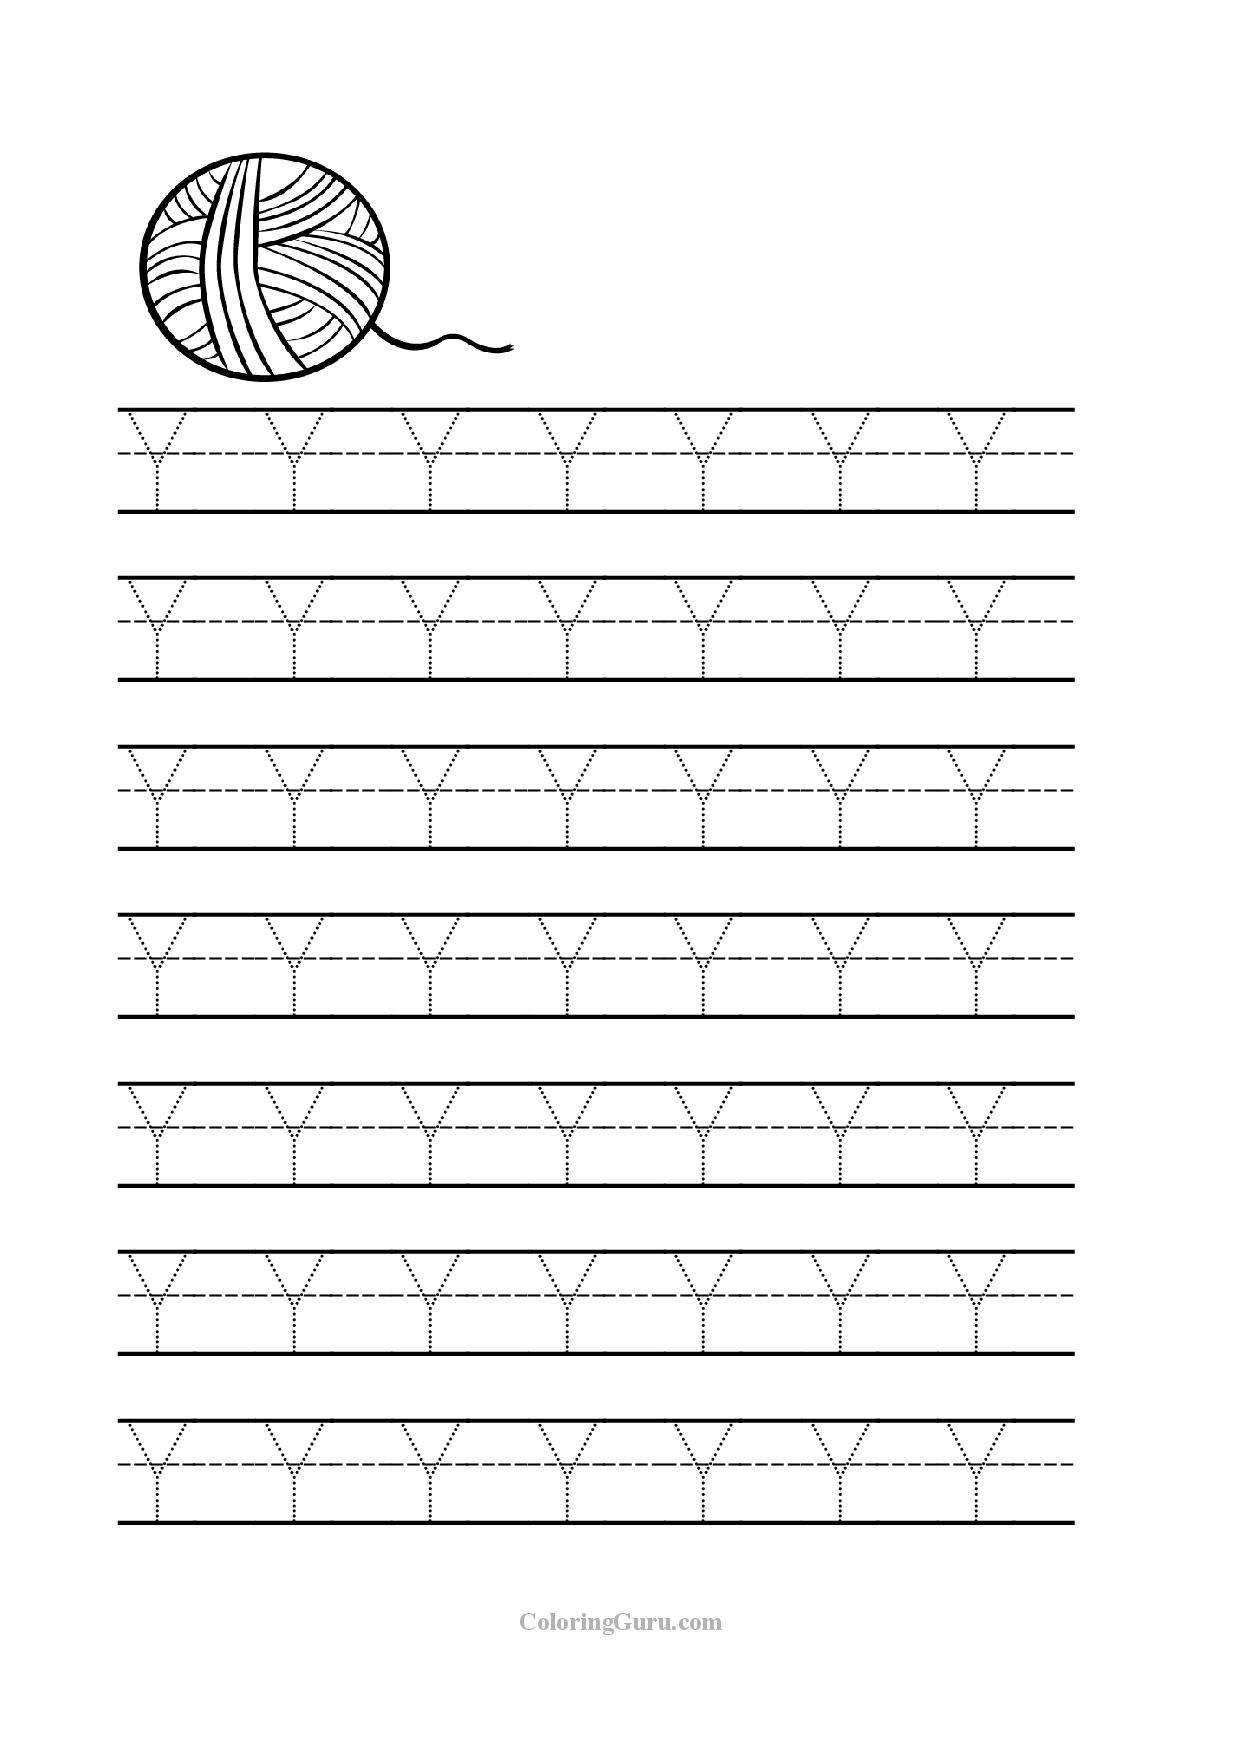 Free Printable Tracing Letter Y Worksheets For Preschool with regard to Tracing Letter Y Worksheets